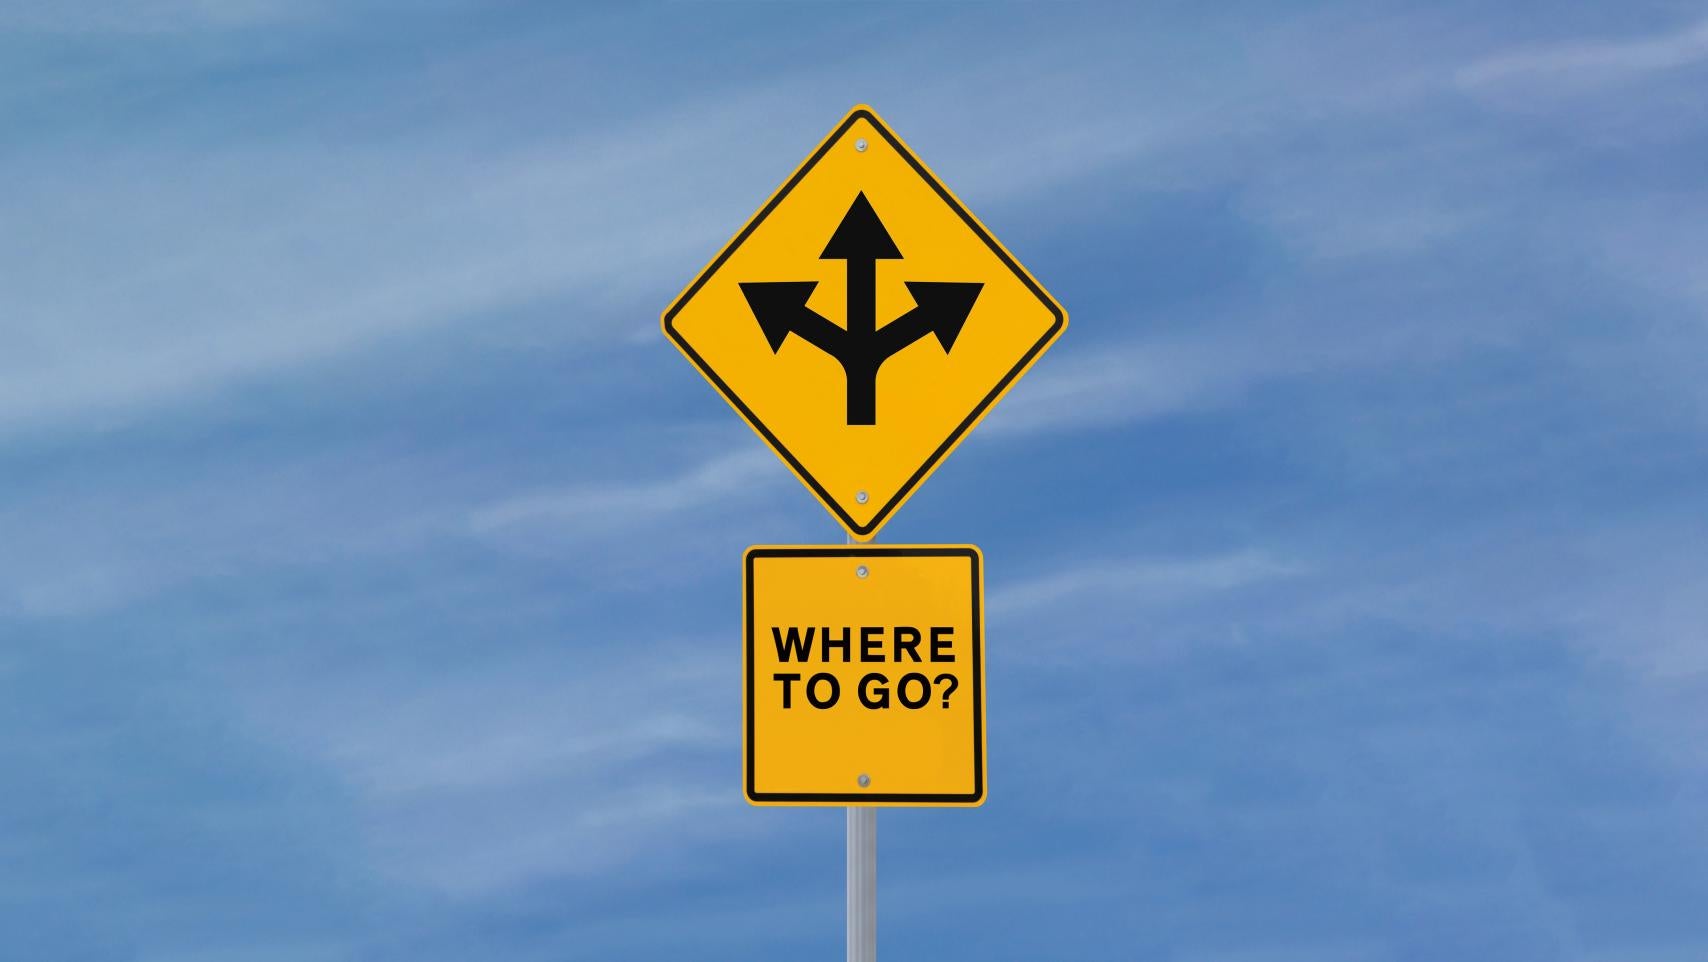 A yellow road sign displays an arrow branching off in three directions and reads "Where to go?"